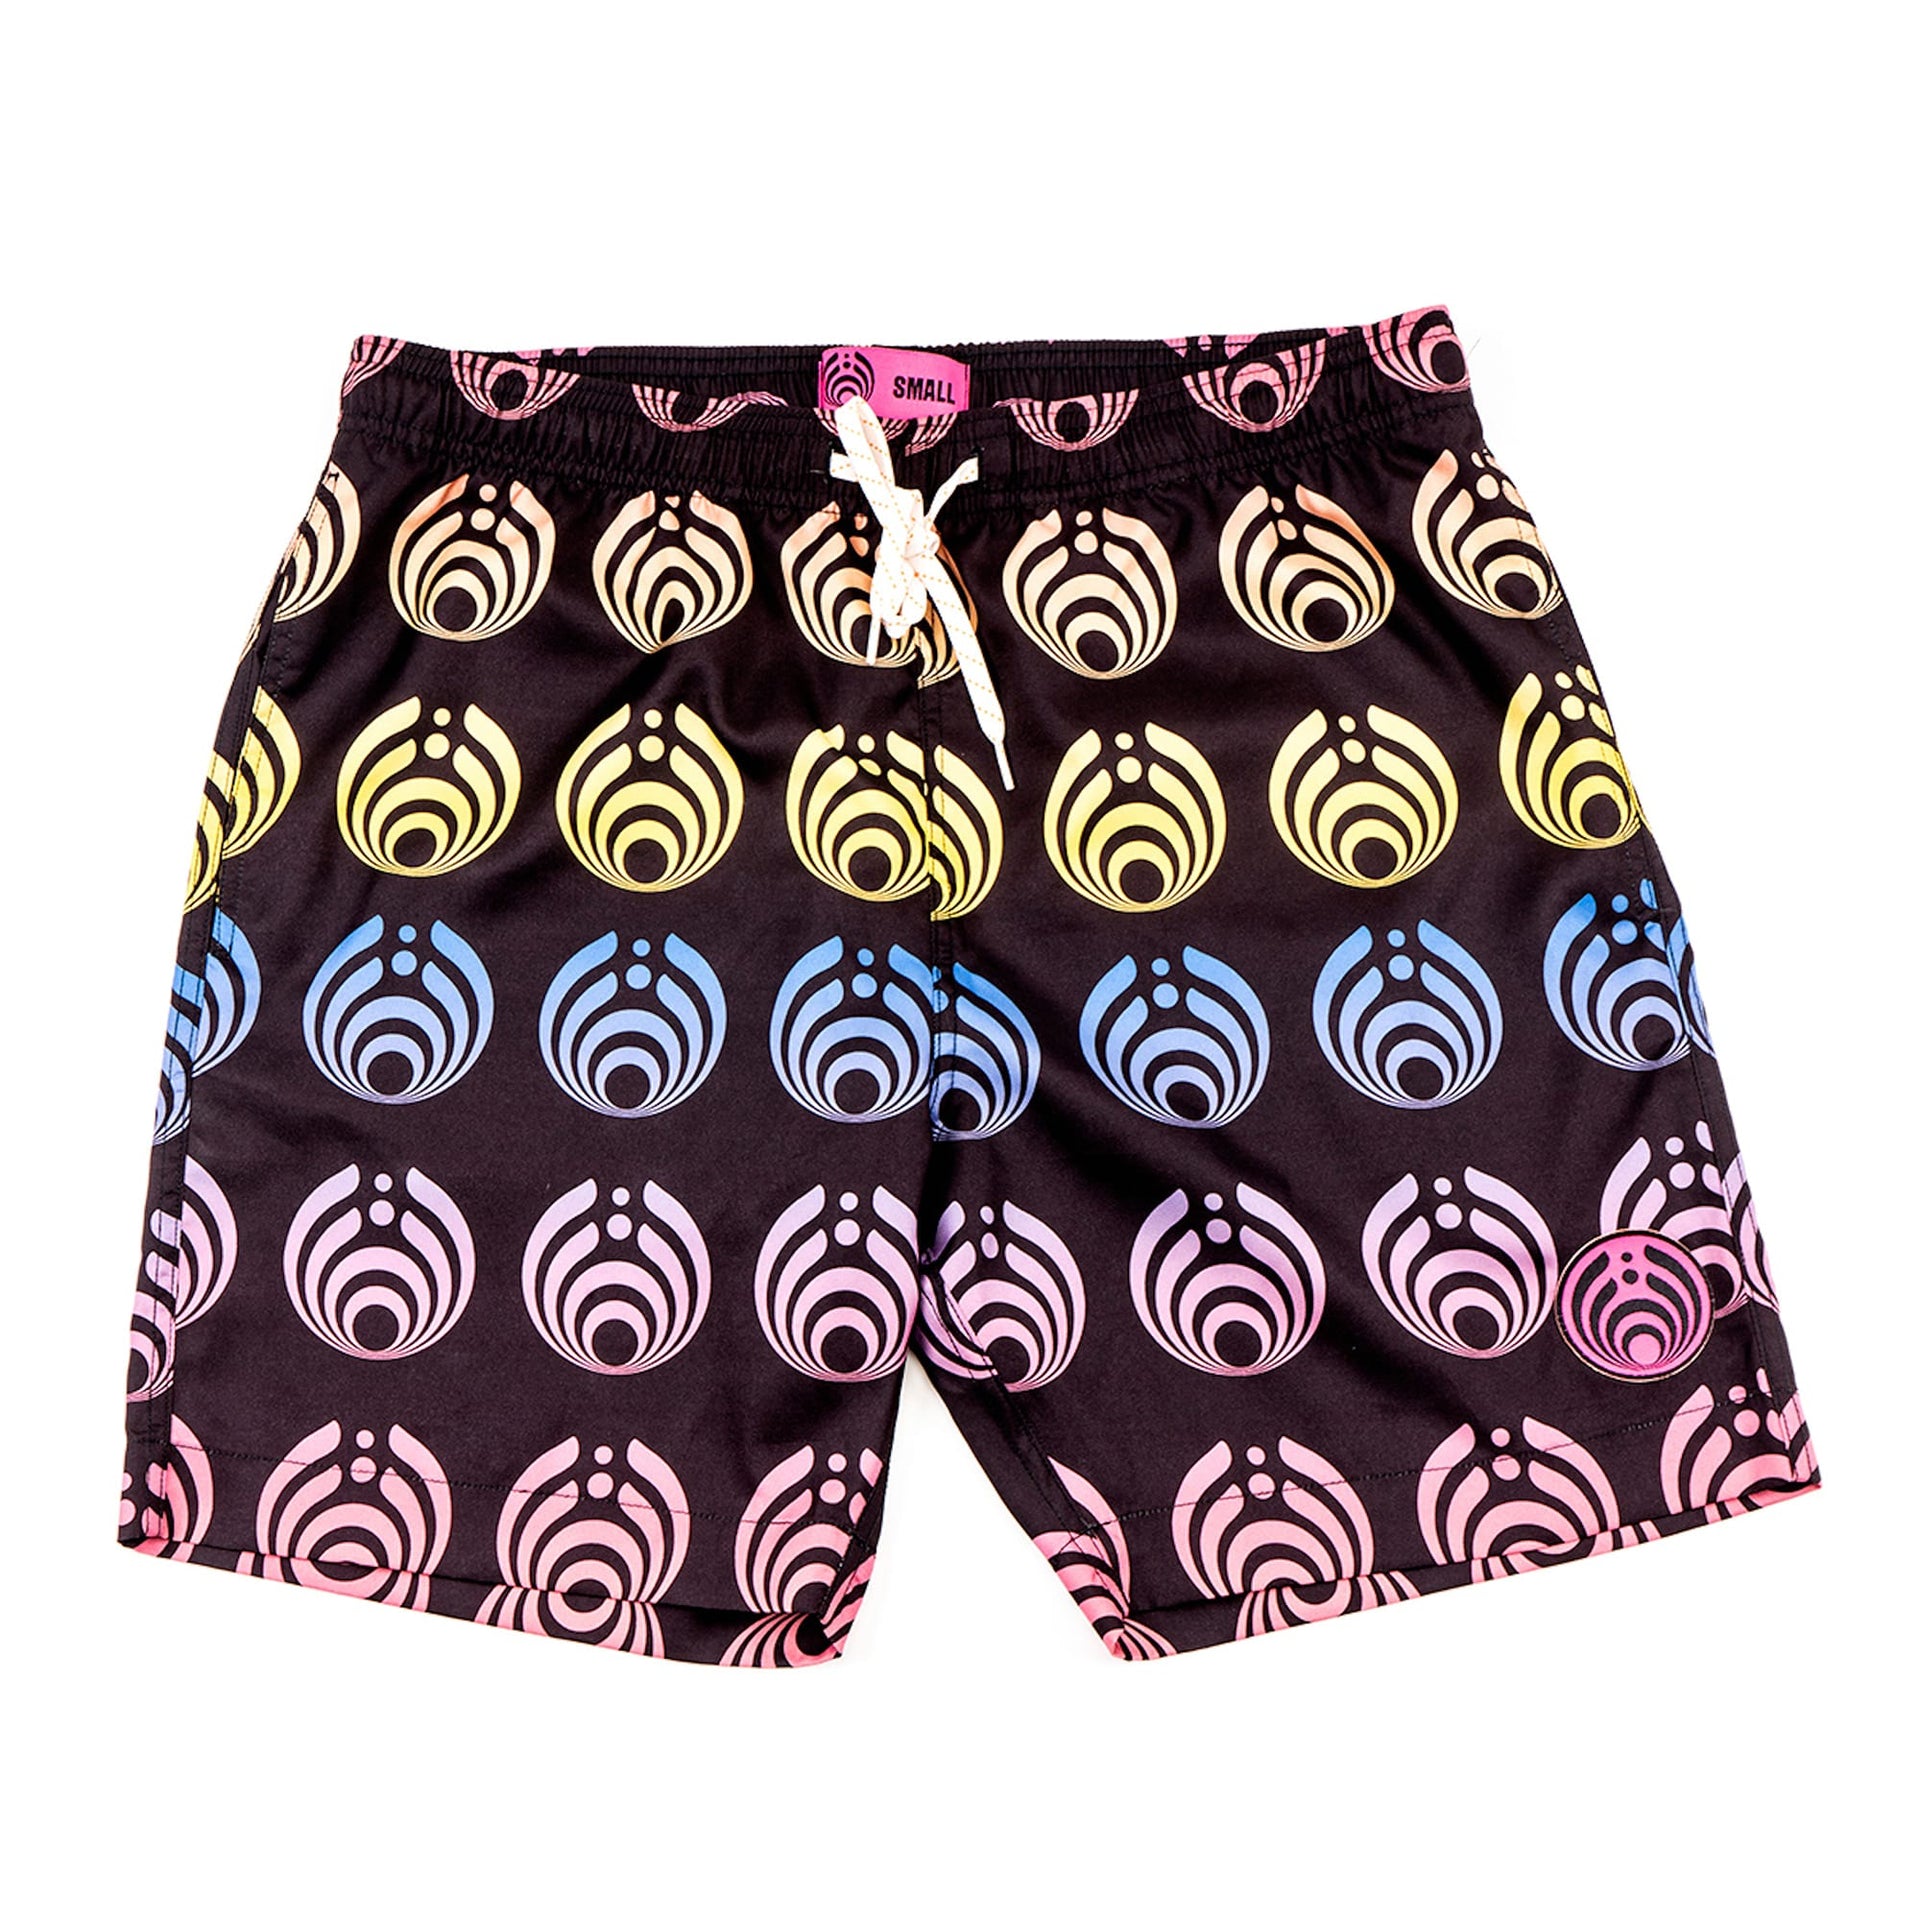 Apparel – Bassnectar - The Other Side